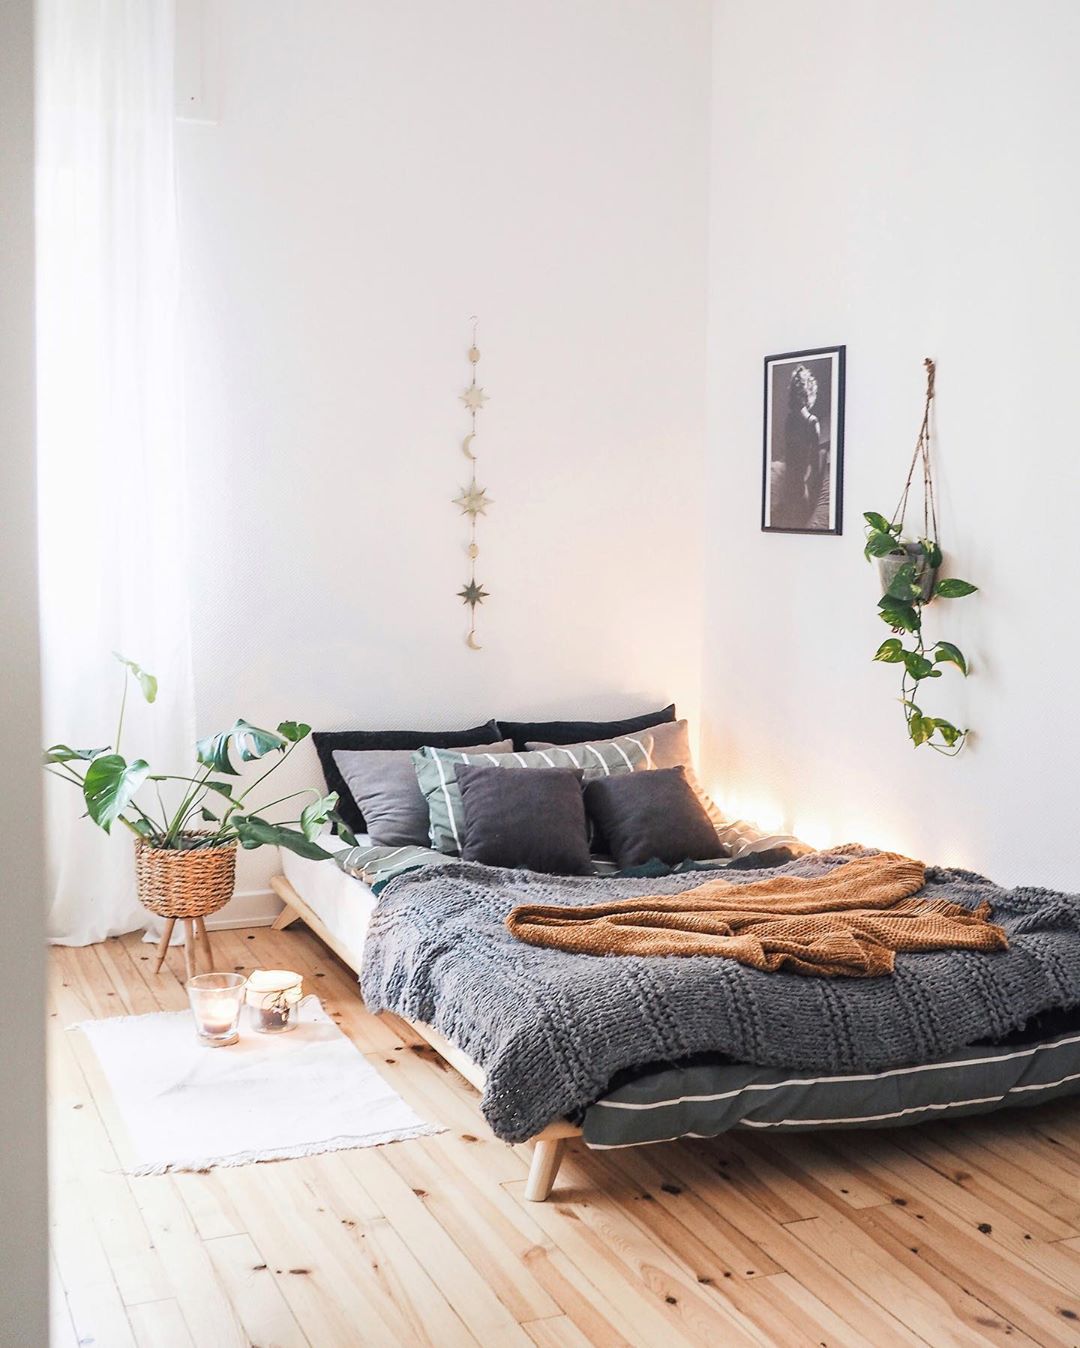 White bedroom with gray bed, plants, and wood floors. Photo by Instagram user @what.the.hygge